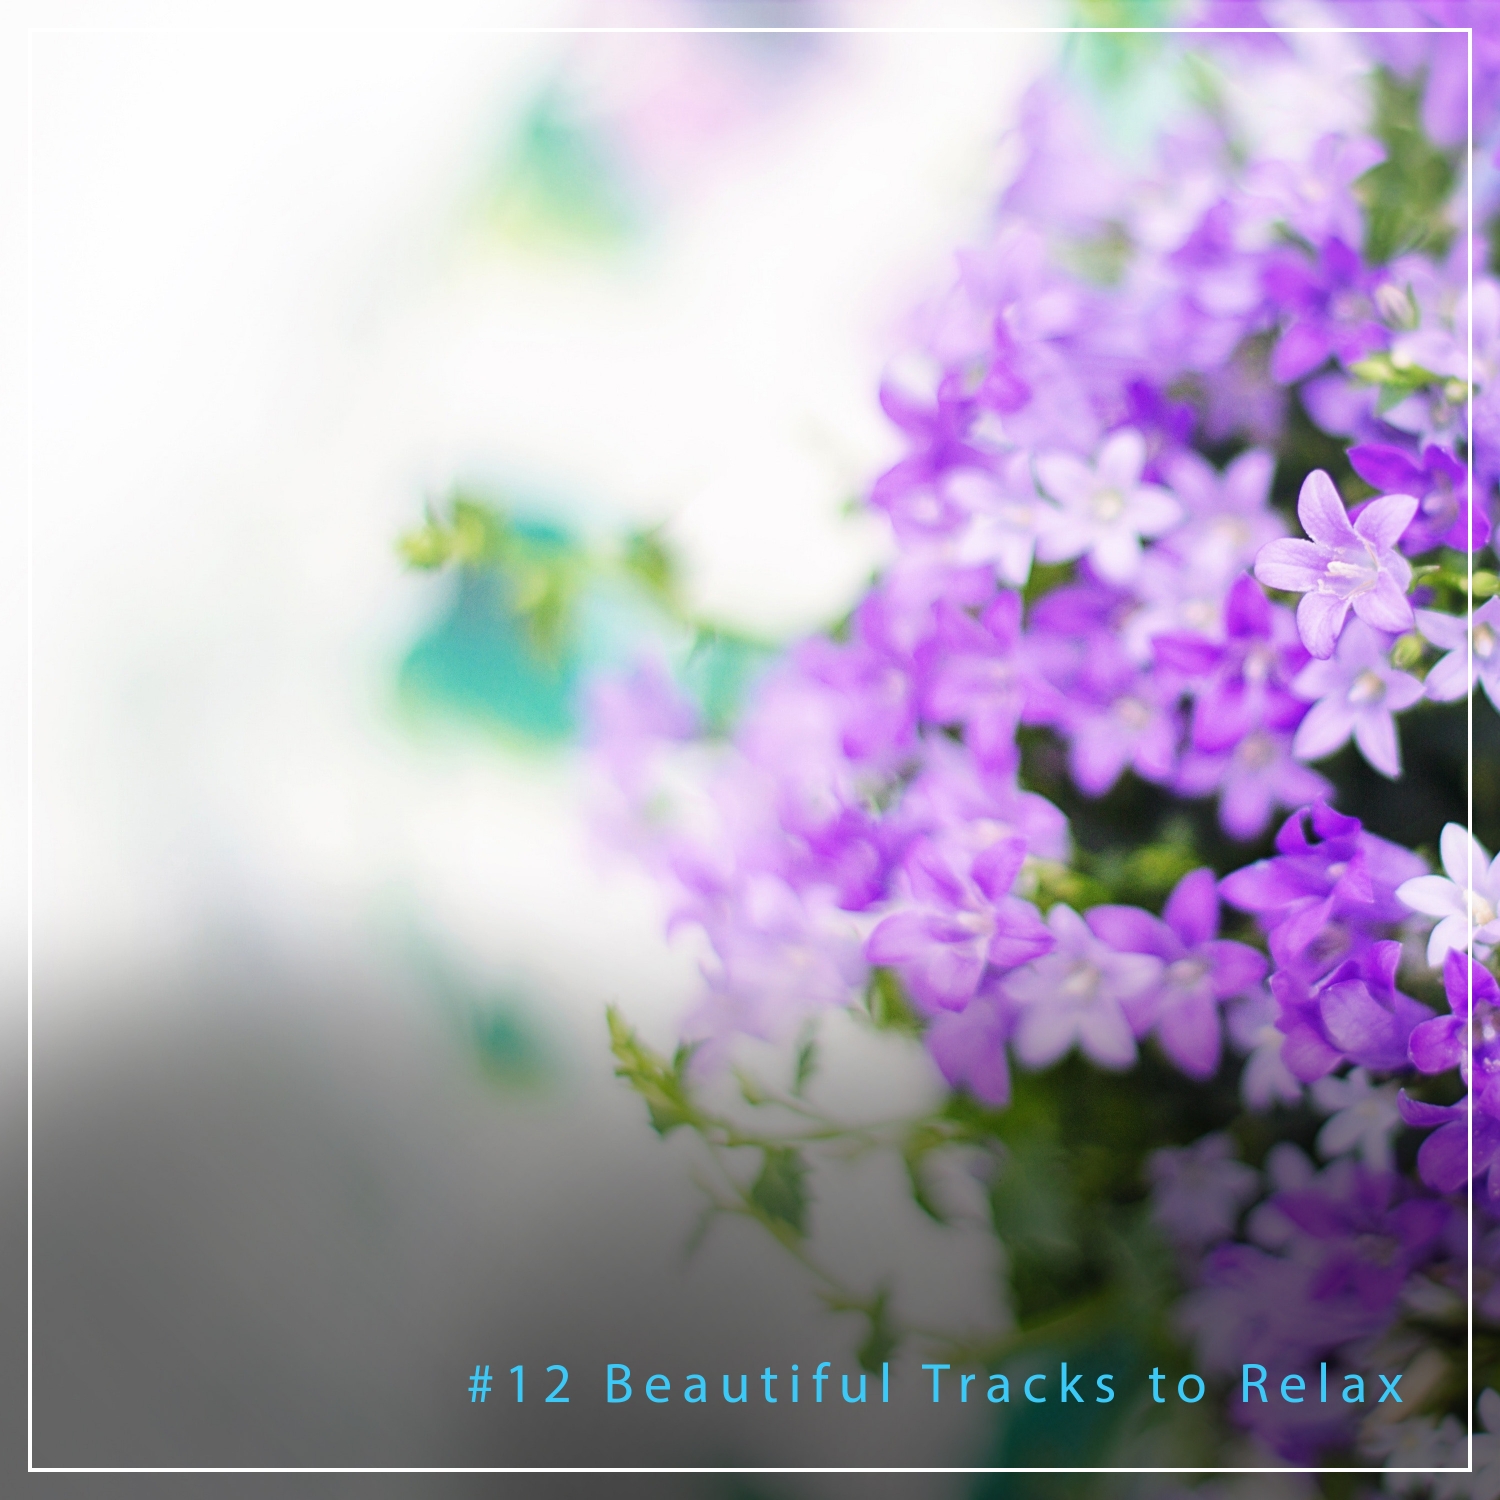 #12 Beautiful Tracks to Relax